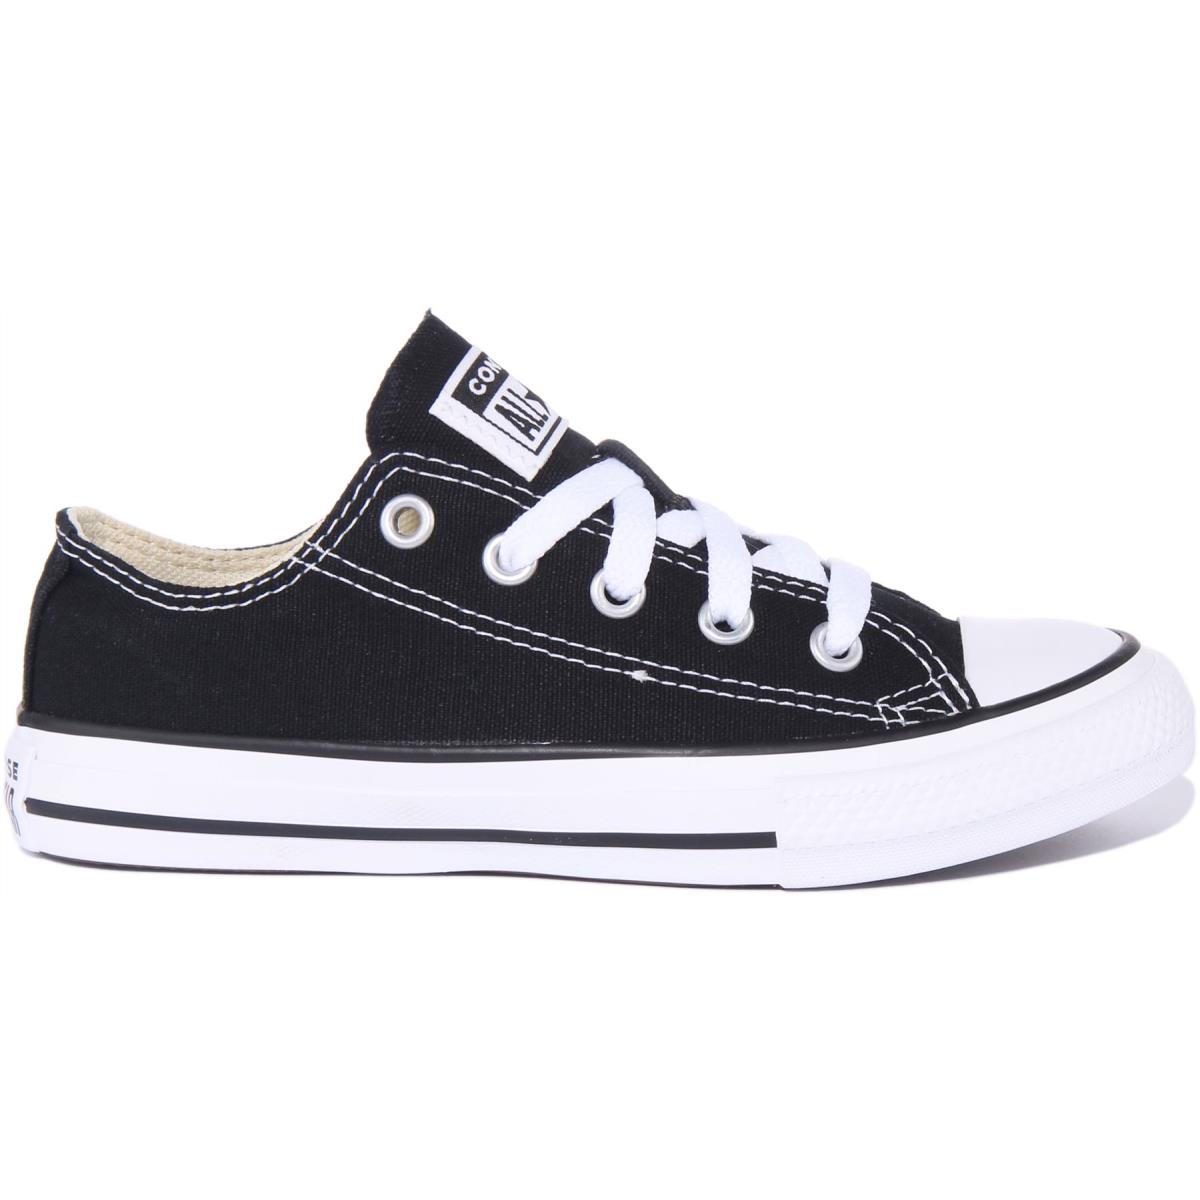 Converse Asox Core Kids Lace Up Low Top Canvas Sneakers In Black Size US 10 - 3